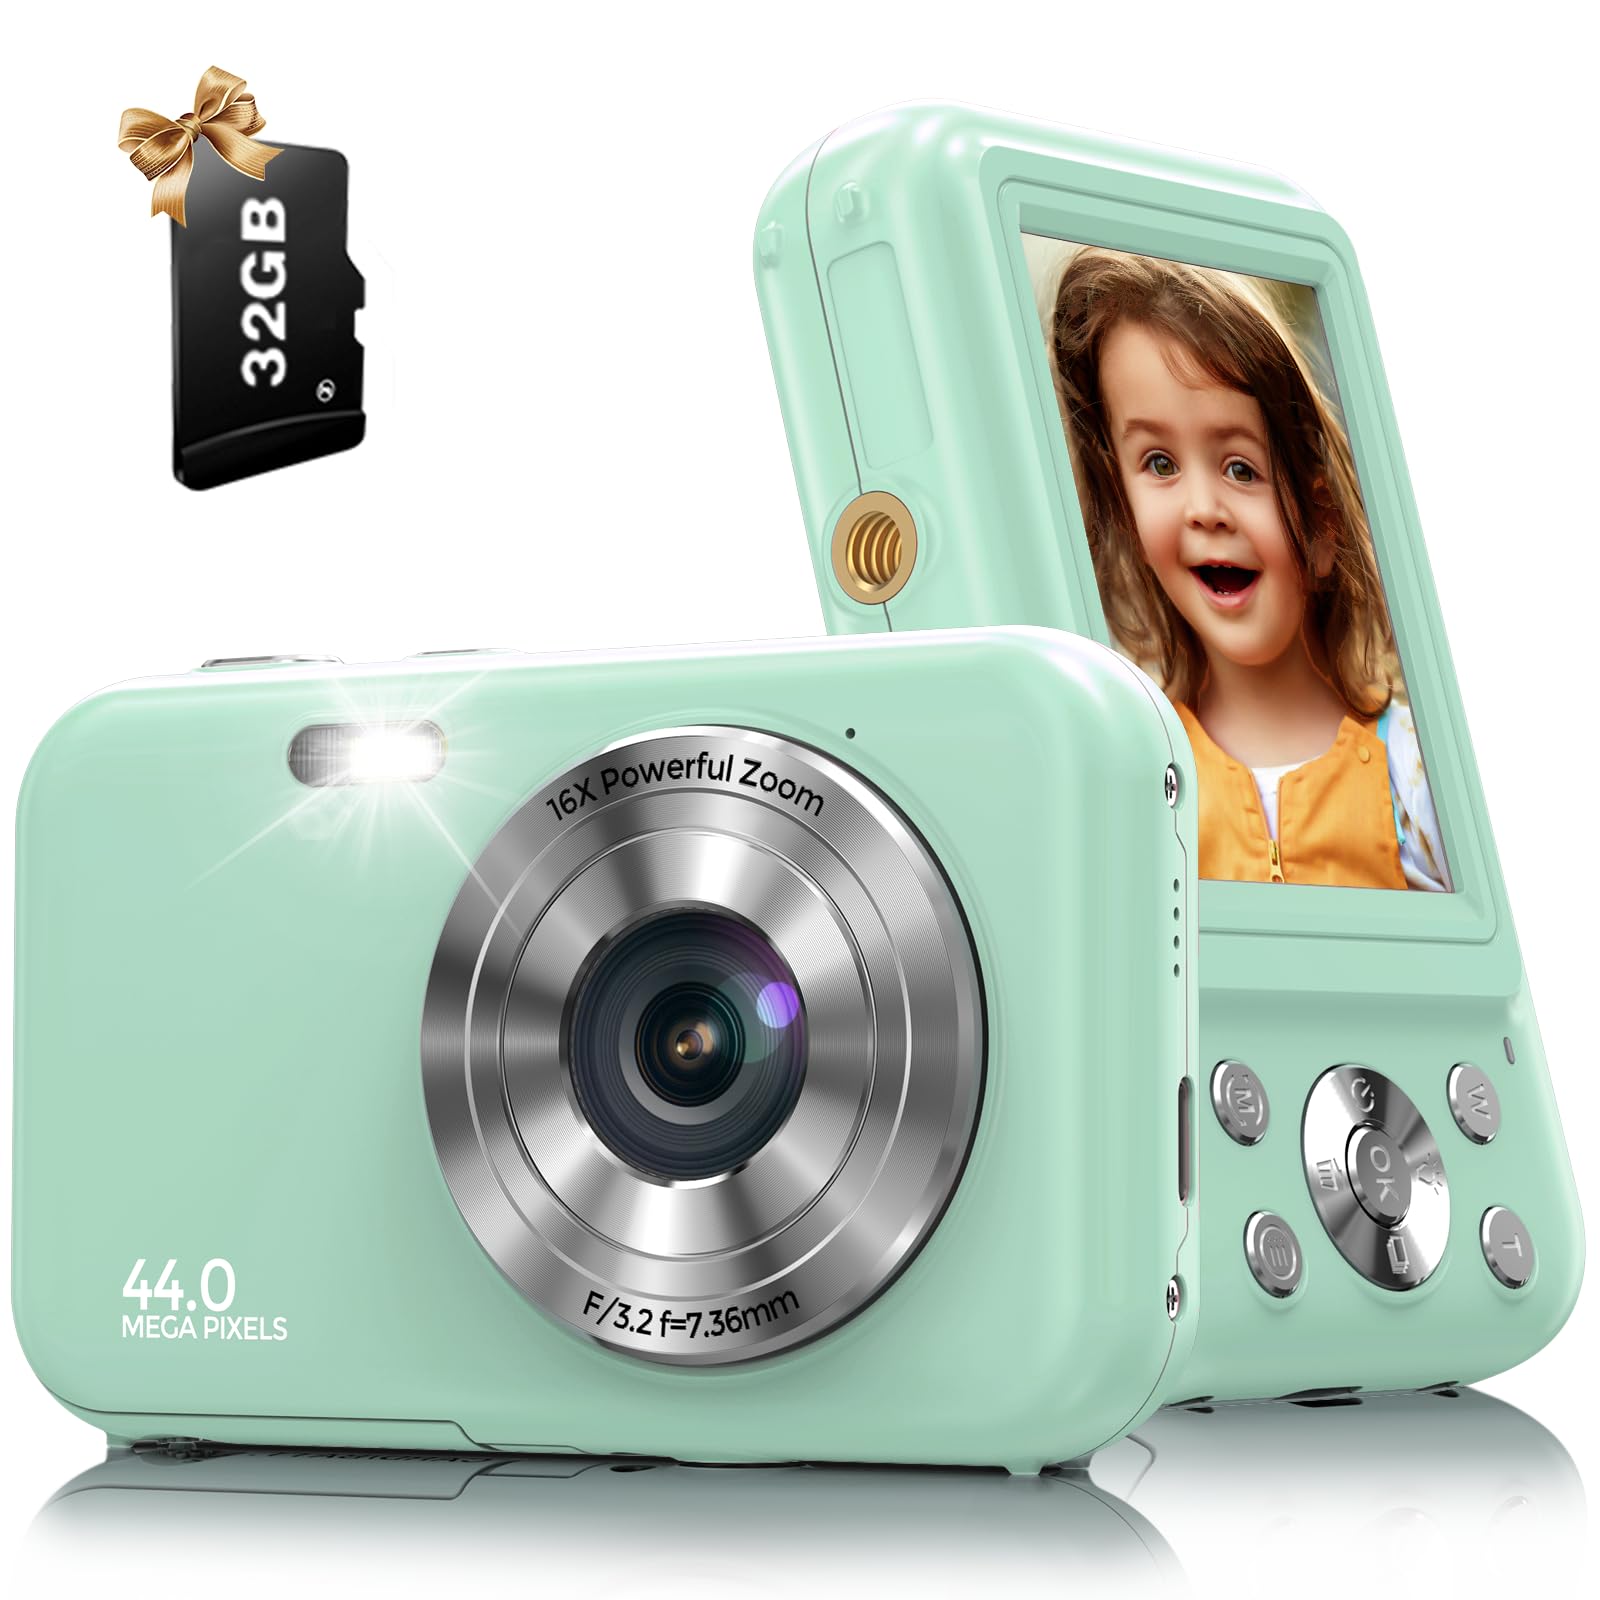 Digital Camera, FHD 1080P 44MP Kids Camera for Photography with 32GB Card, 16X Zoom Point and Shoot Digital Camera with Fill Light, Anti-Shake Compact Small Camera for Teens Boys Girls (Green)